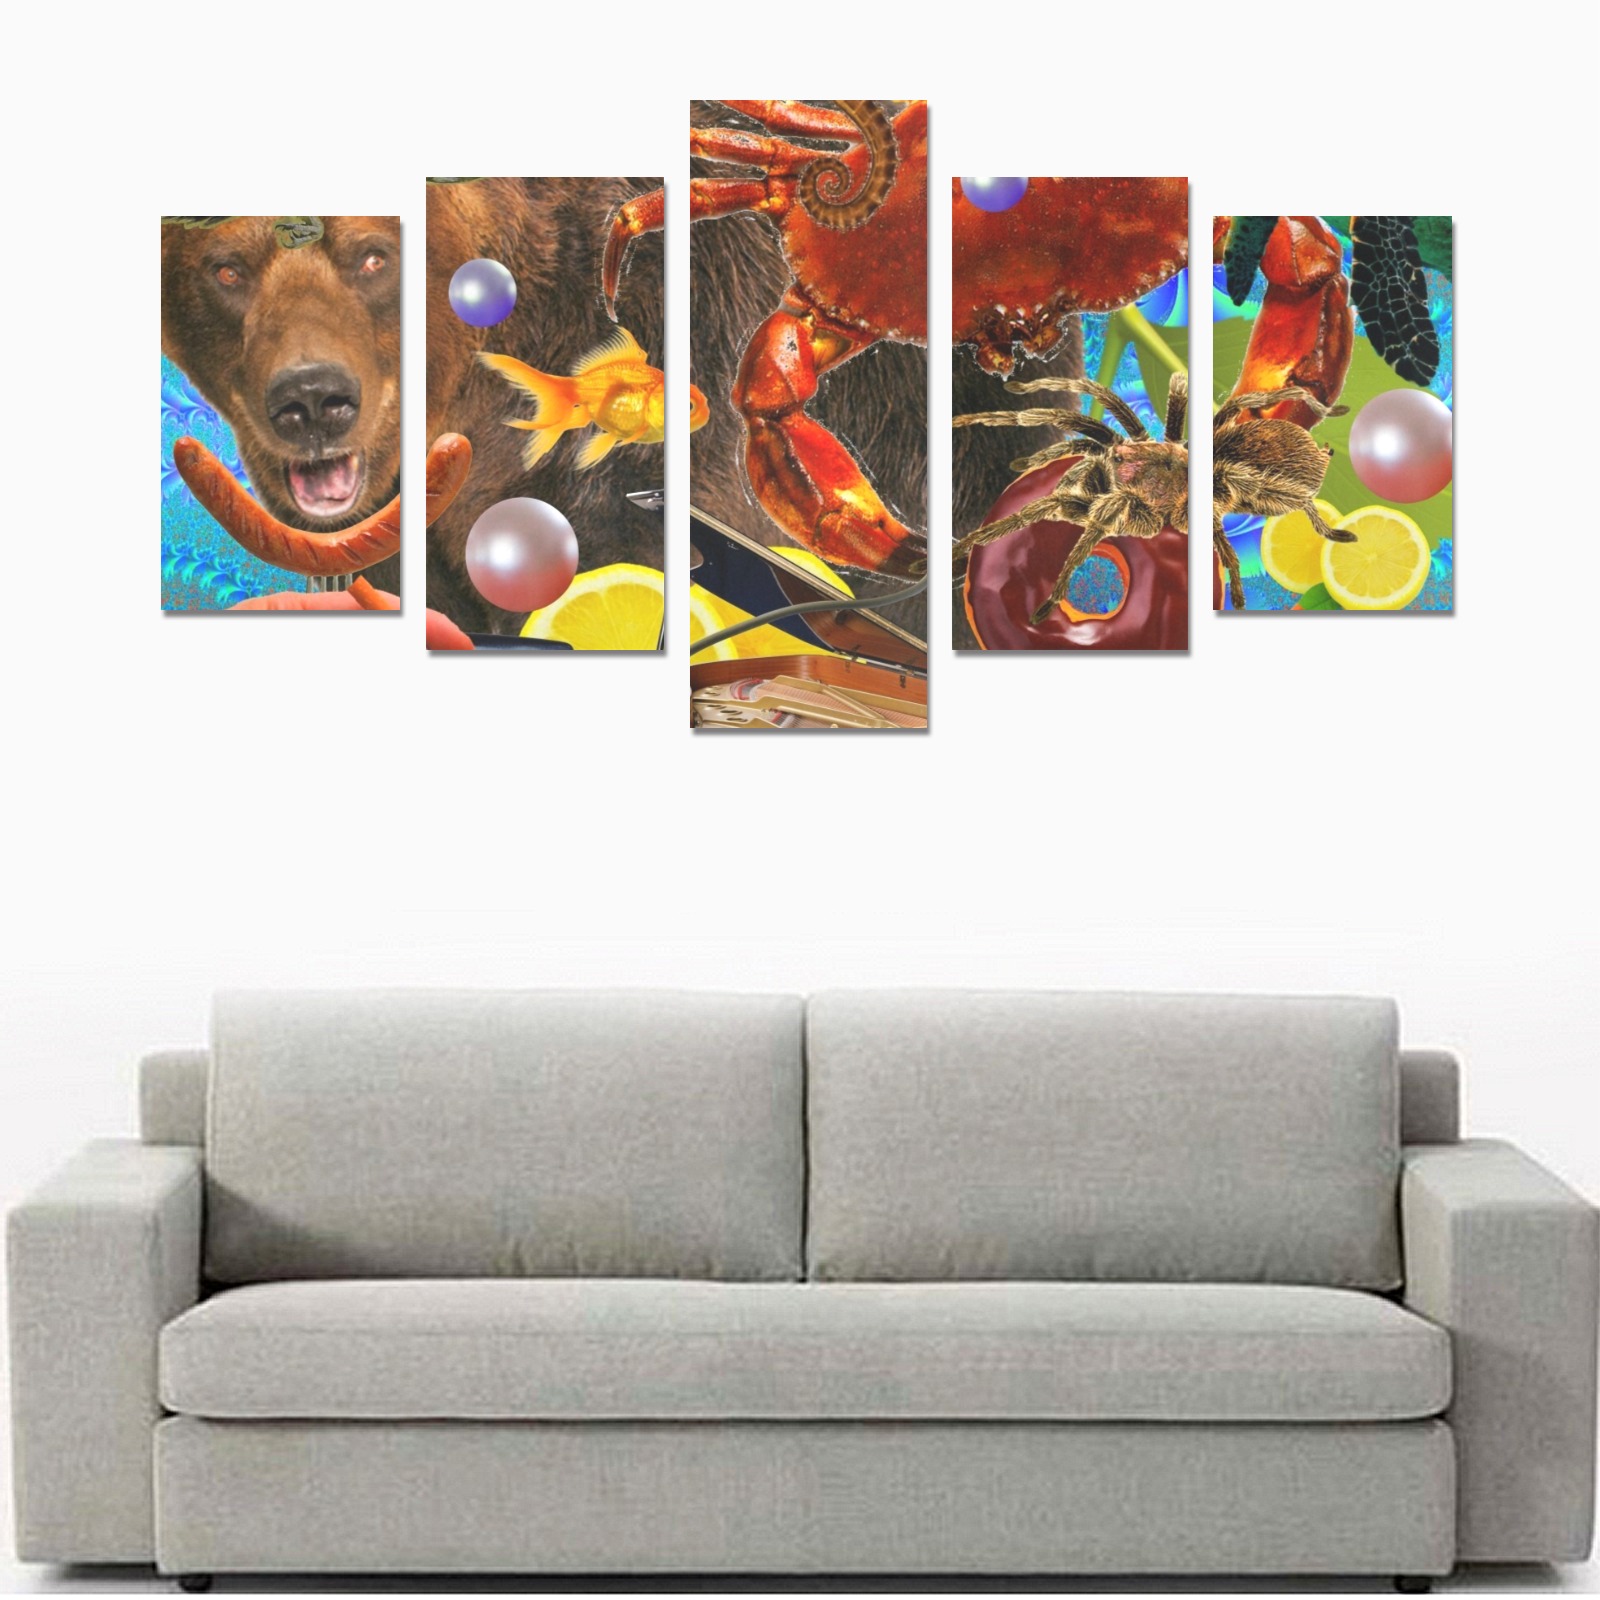 THROUGH SPACE AND TIME 2 Canvas Print Sets C (No Frame)